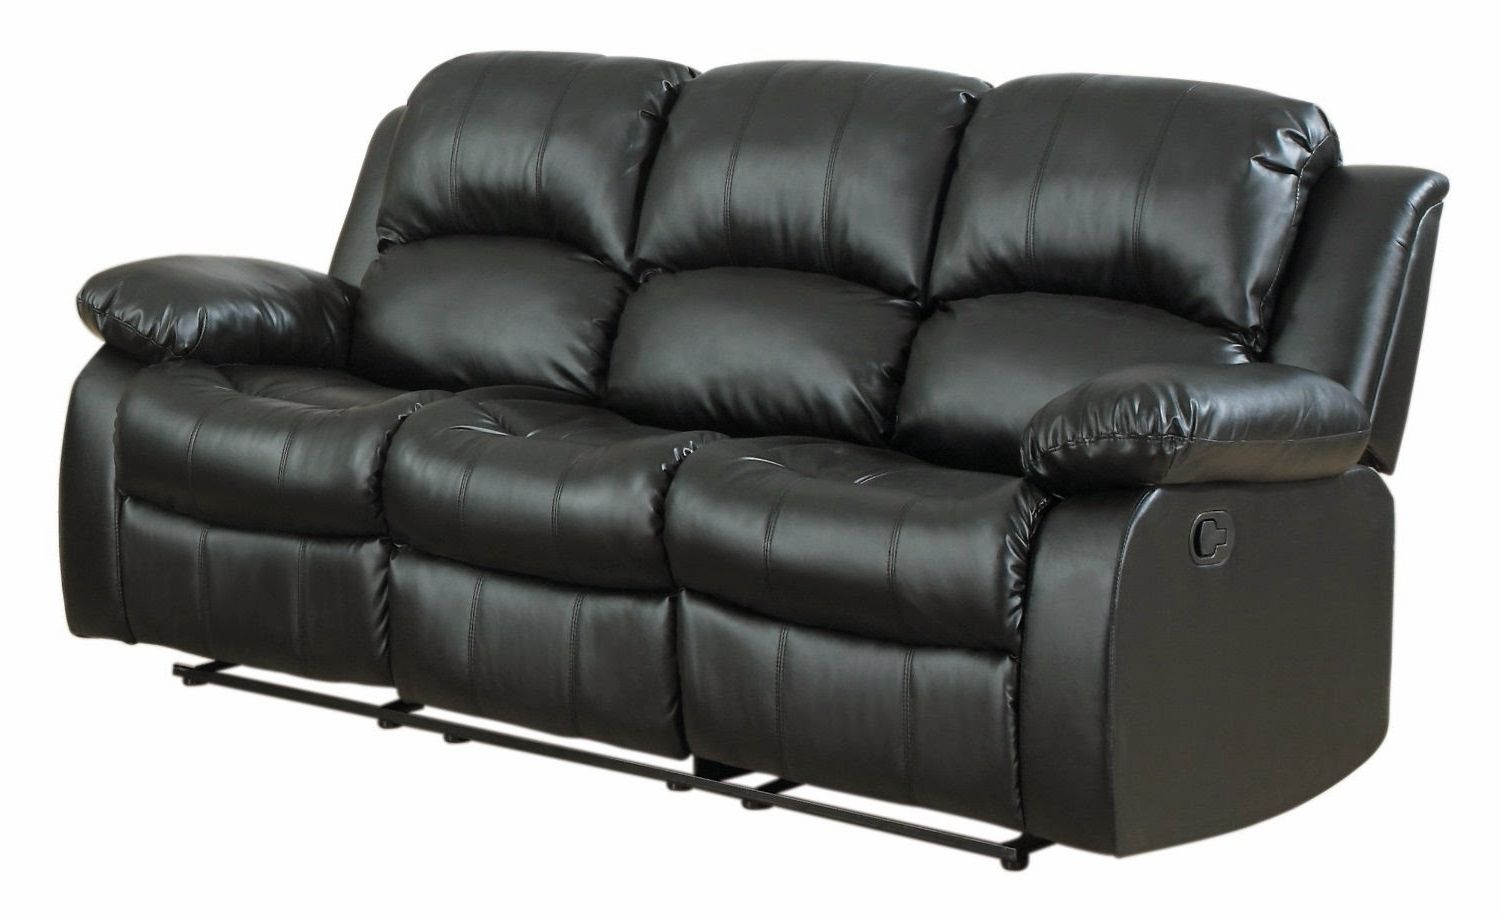 Current Reclining Sofas For Sale: Berkline Leather Reclining Sofa Costco Intended For Berkline Sofas (View 4 of 15)